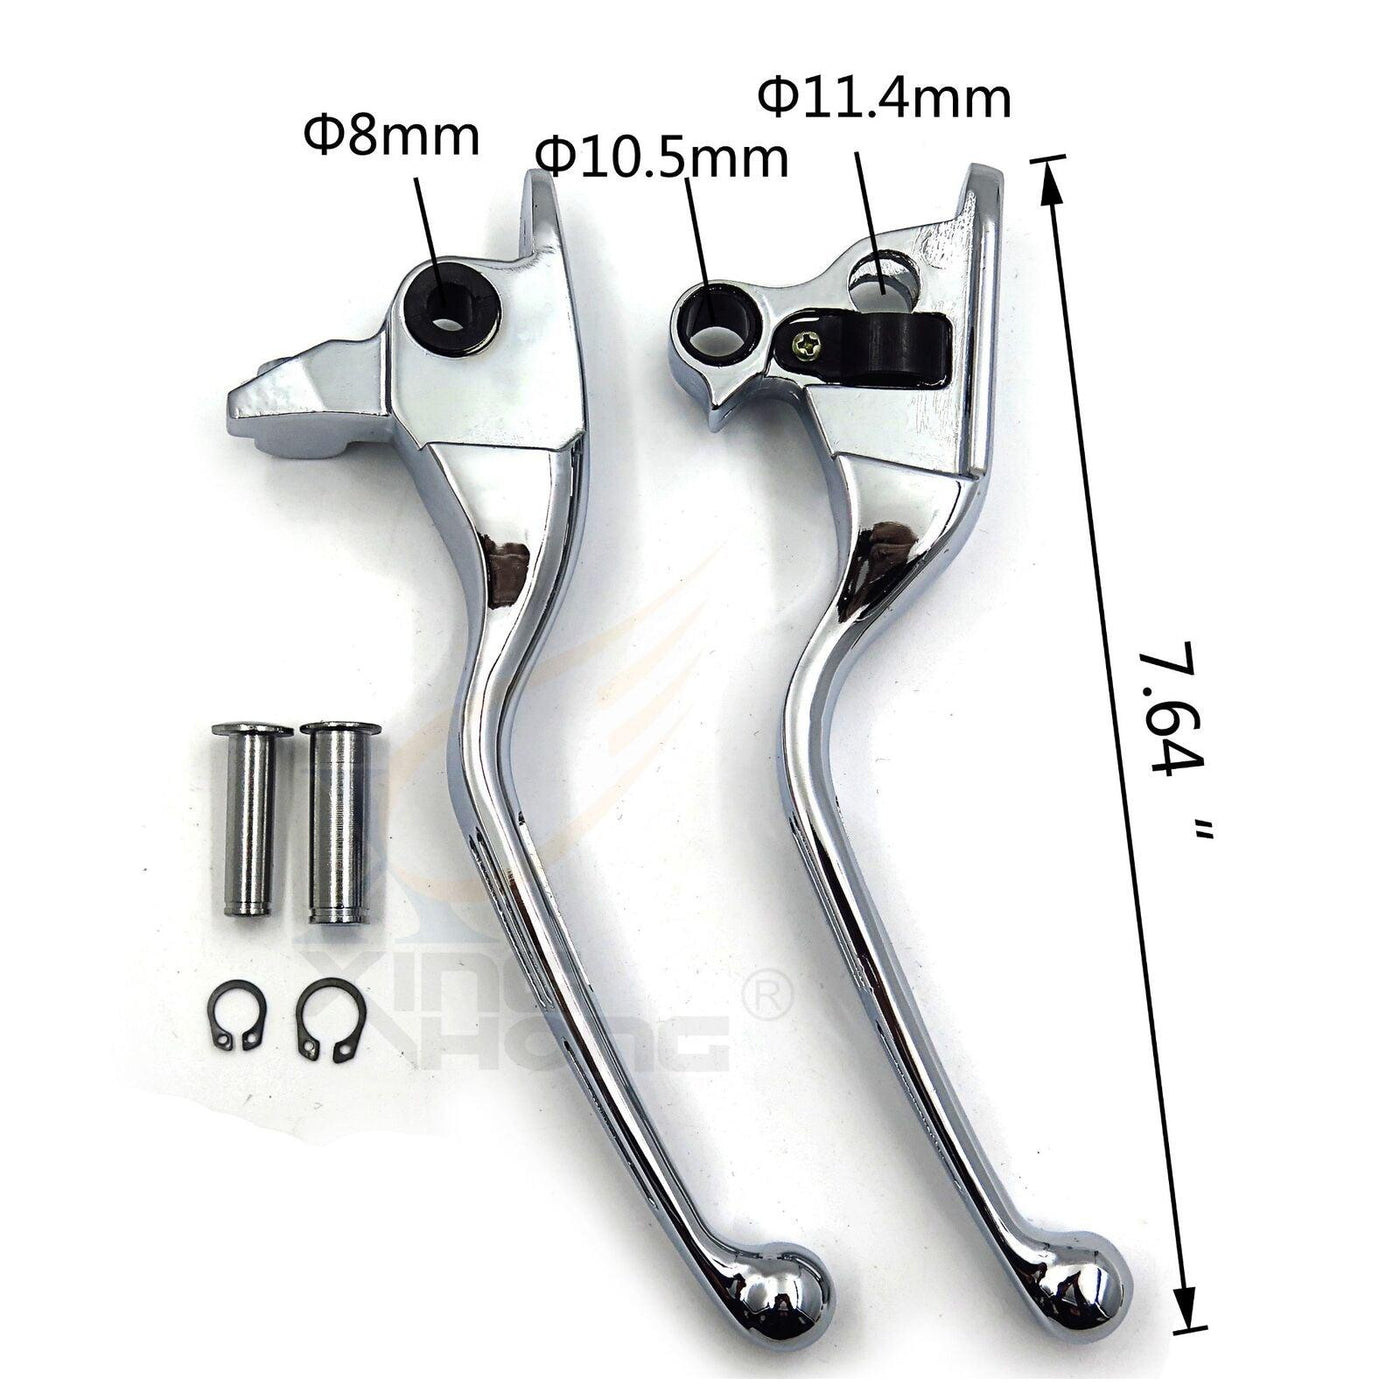 Chromed Brake Clutch Hand Levers For Harley 2008-2013 Touring and Trike - Moto Life Products